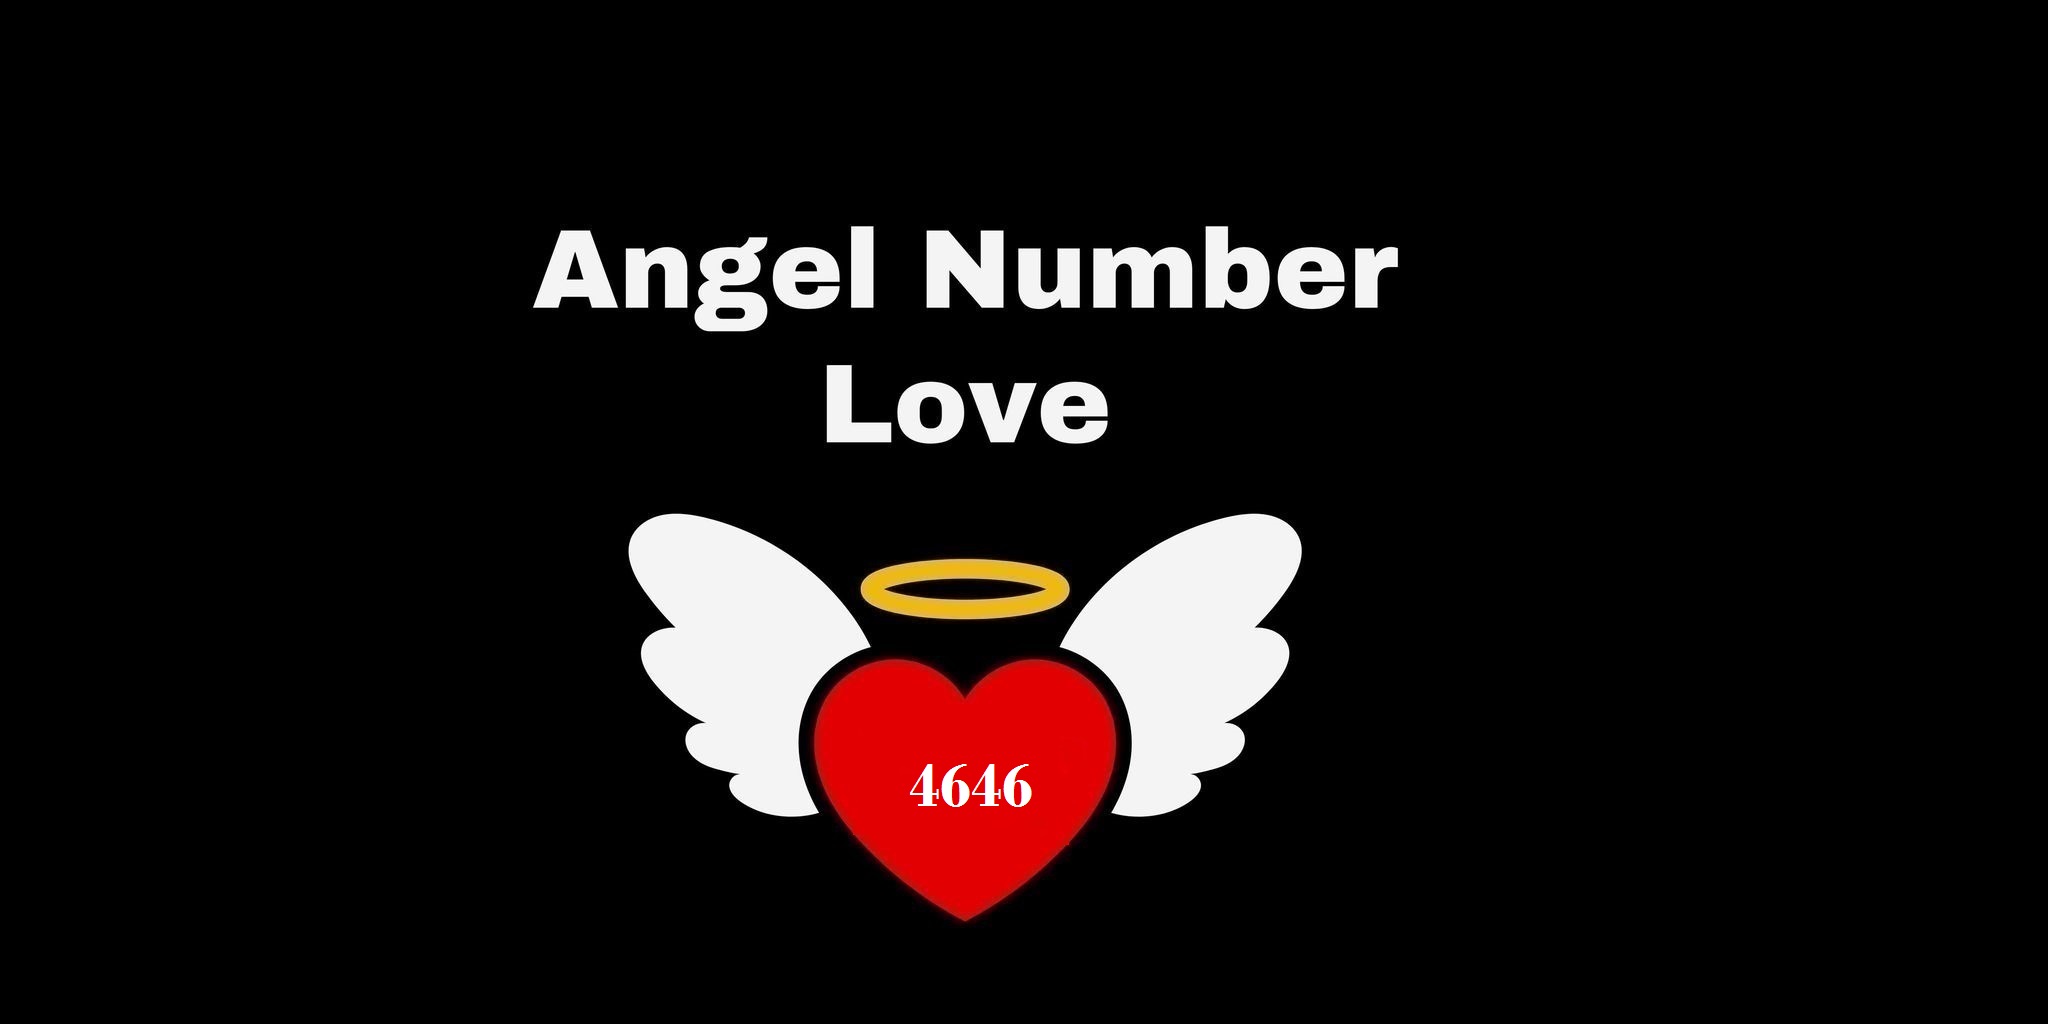 4646 Angel Number Meaning In Love